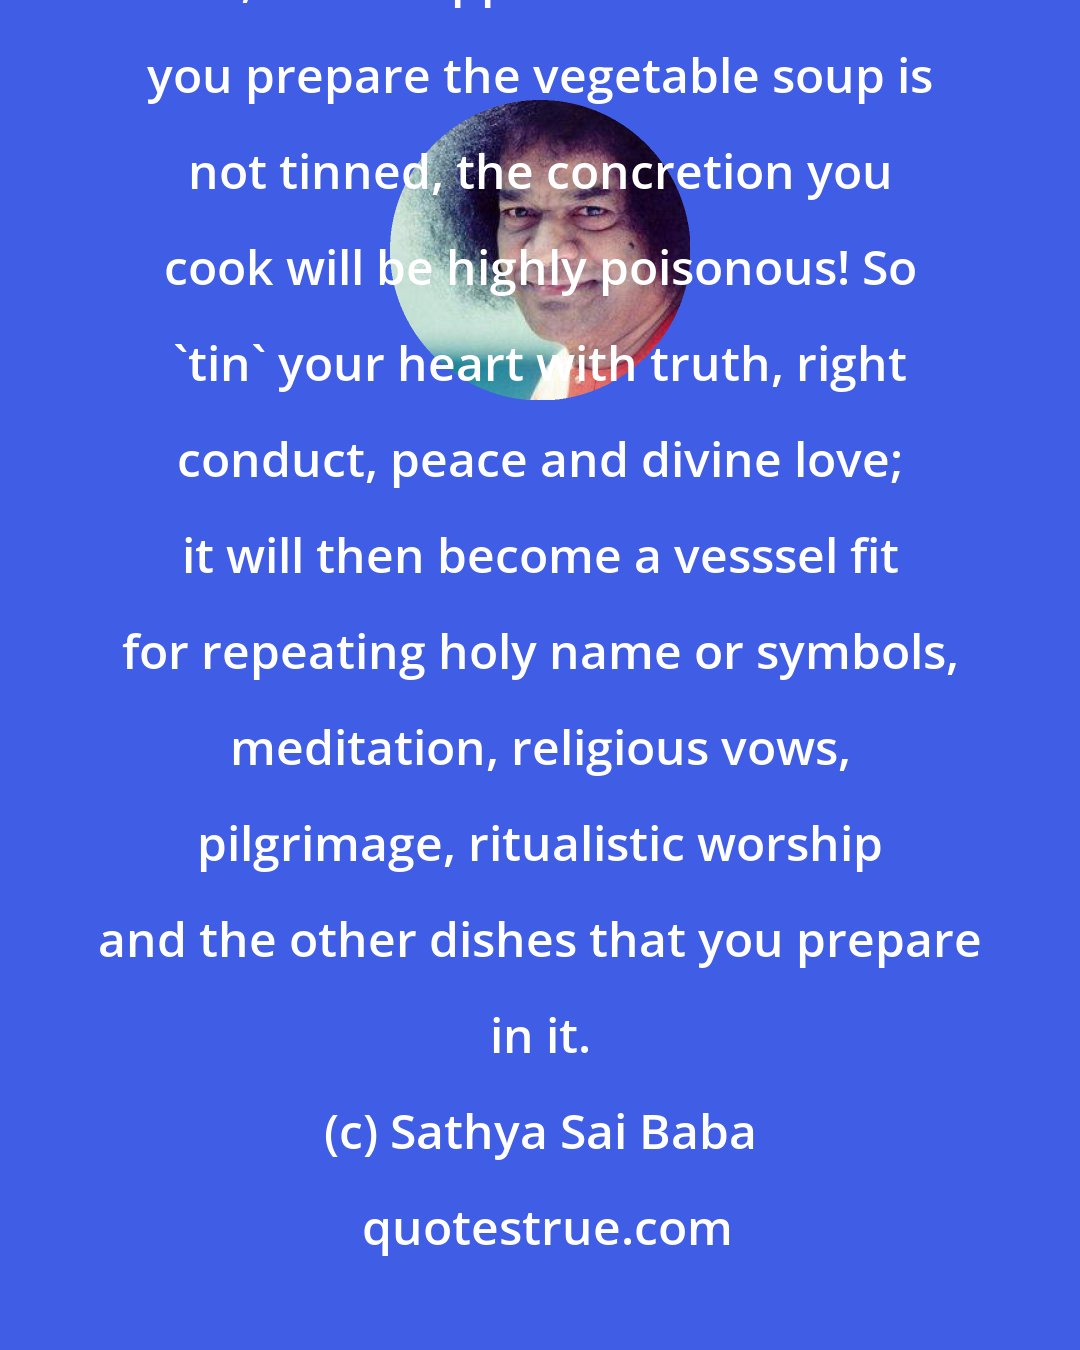 Sathya Sai Baba: You may have the best vegetables, you may be the most capable cook, but, if the copper vessel in which you prepare the vegetable soup is not tinned, the concretion you cook will be highly poisonous! So 'tin' your heart with truth, right conduct, peace and divine love; it will then become a vesssel fit for repeating holy name or symbols, meditation, religious vows, pilgrimage, ritualistic worship and the other dishes that you prepare in it.